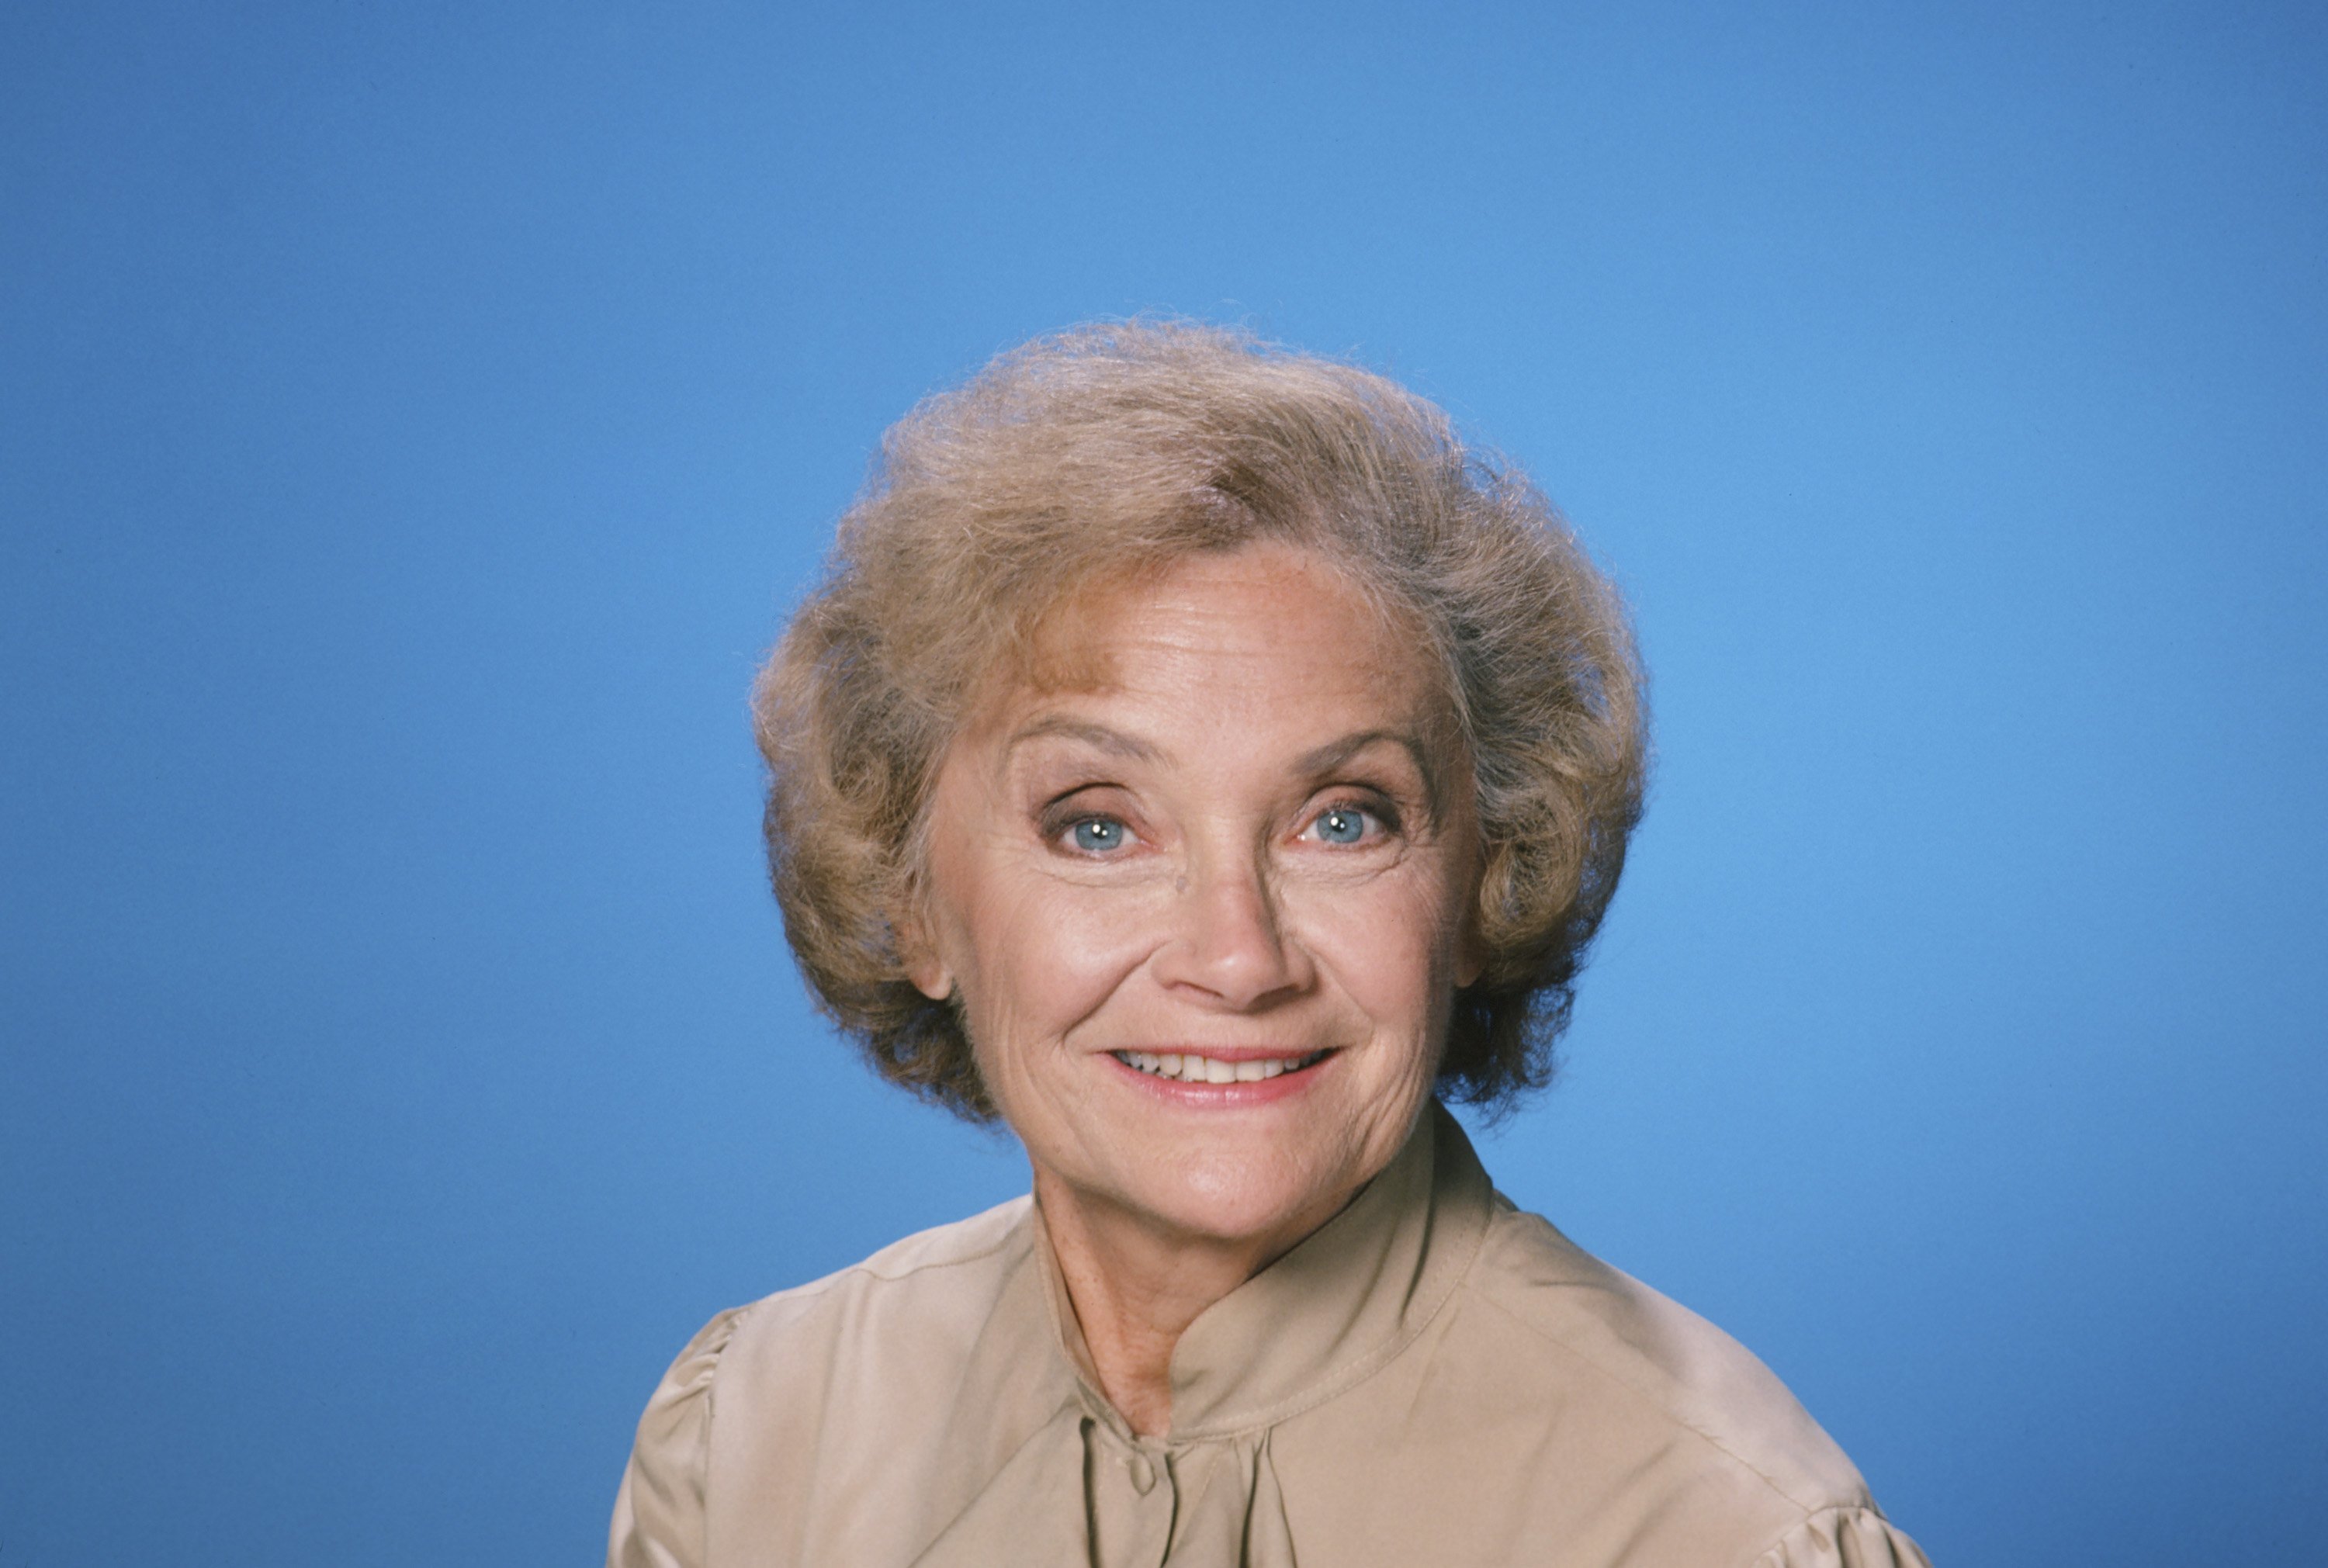 Actress Estelle Getty as Sophia Petrillo during Season 1 of the TV sitcom "The Golden Girls." | Source: Getty Images